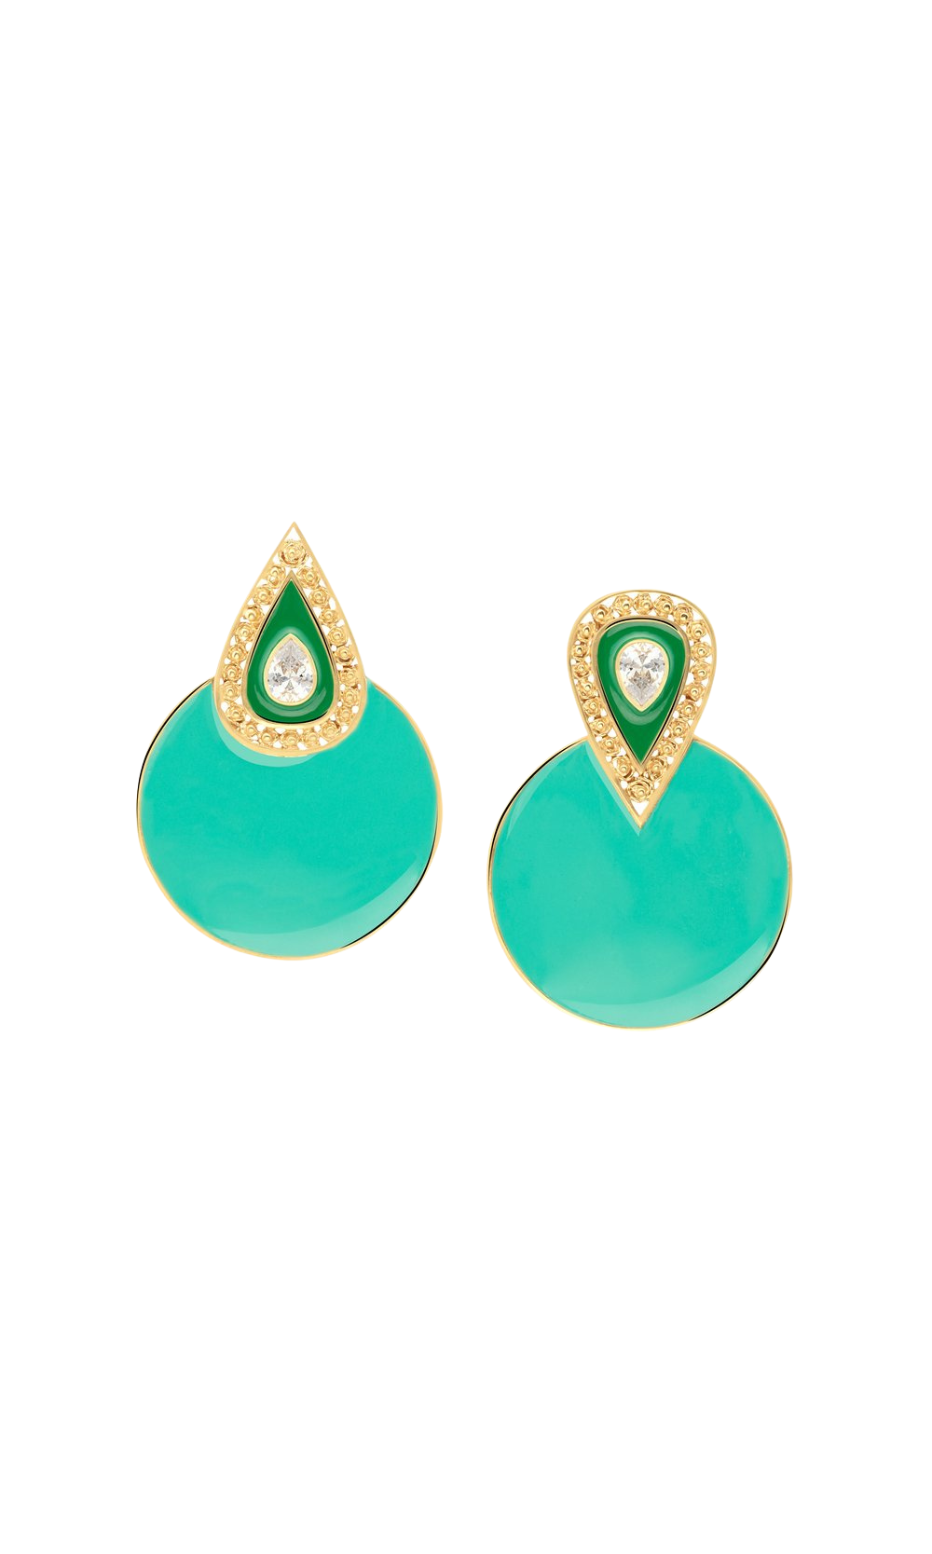 Round Statement Earrings with V-Shape